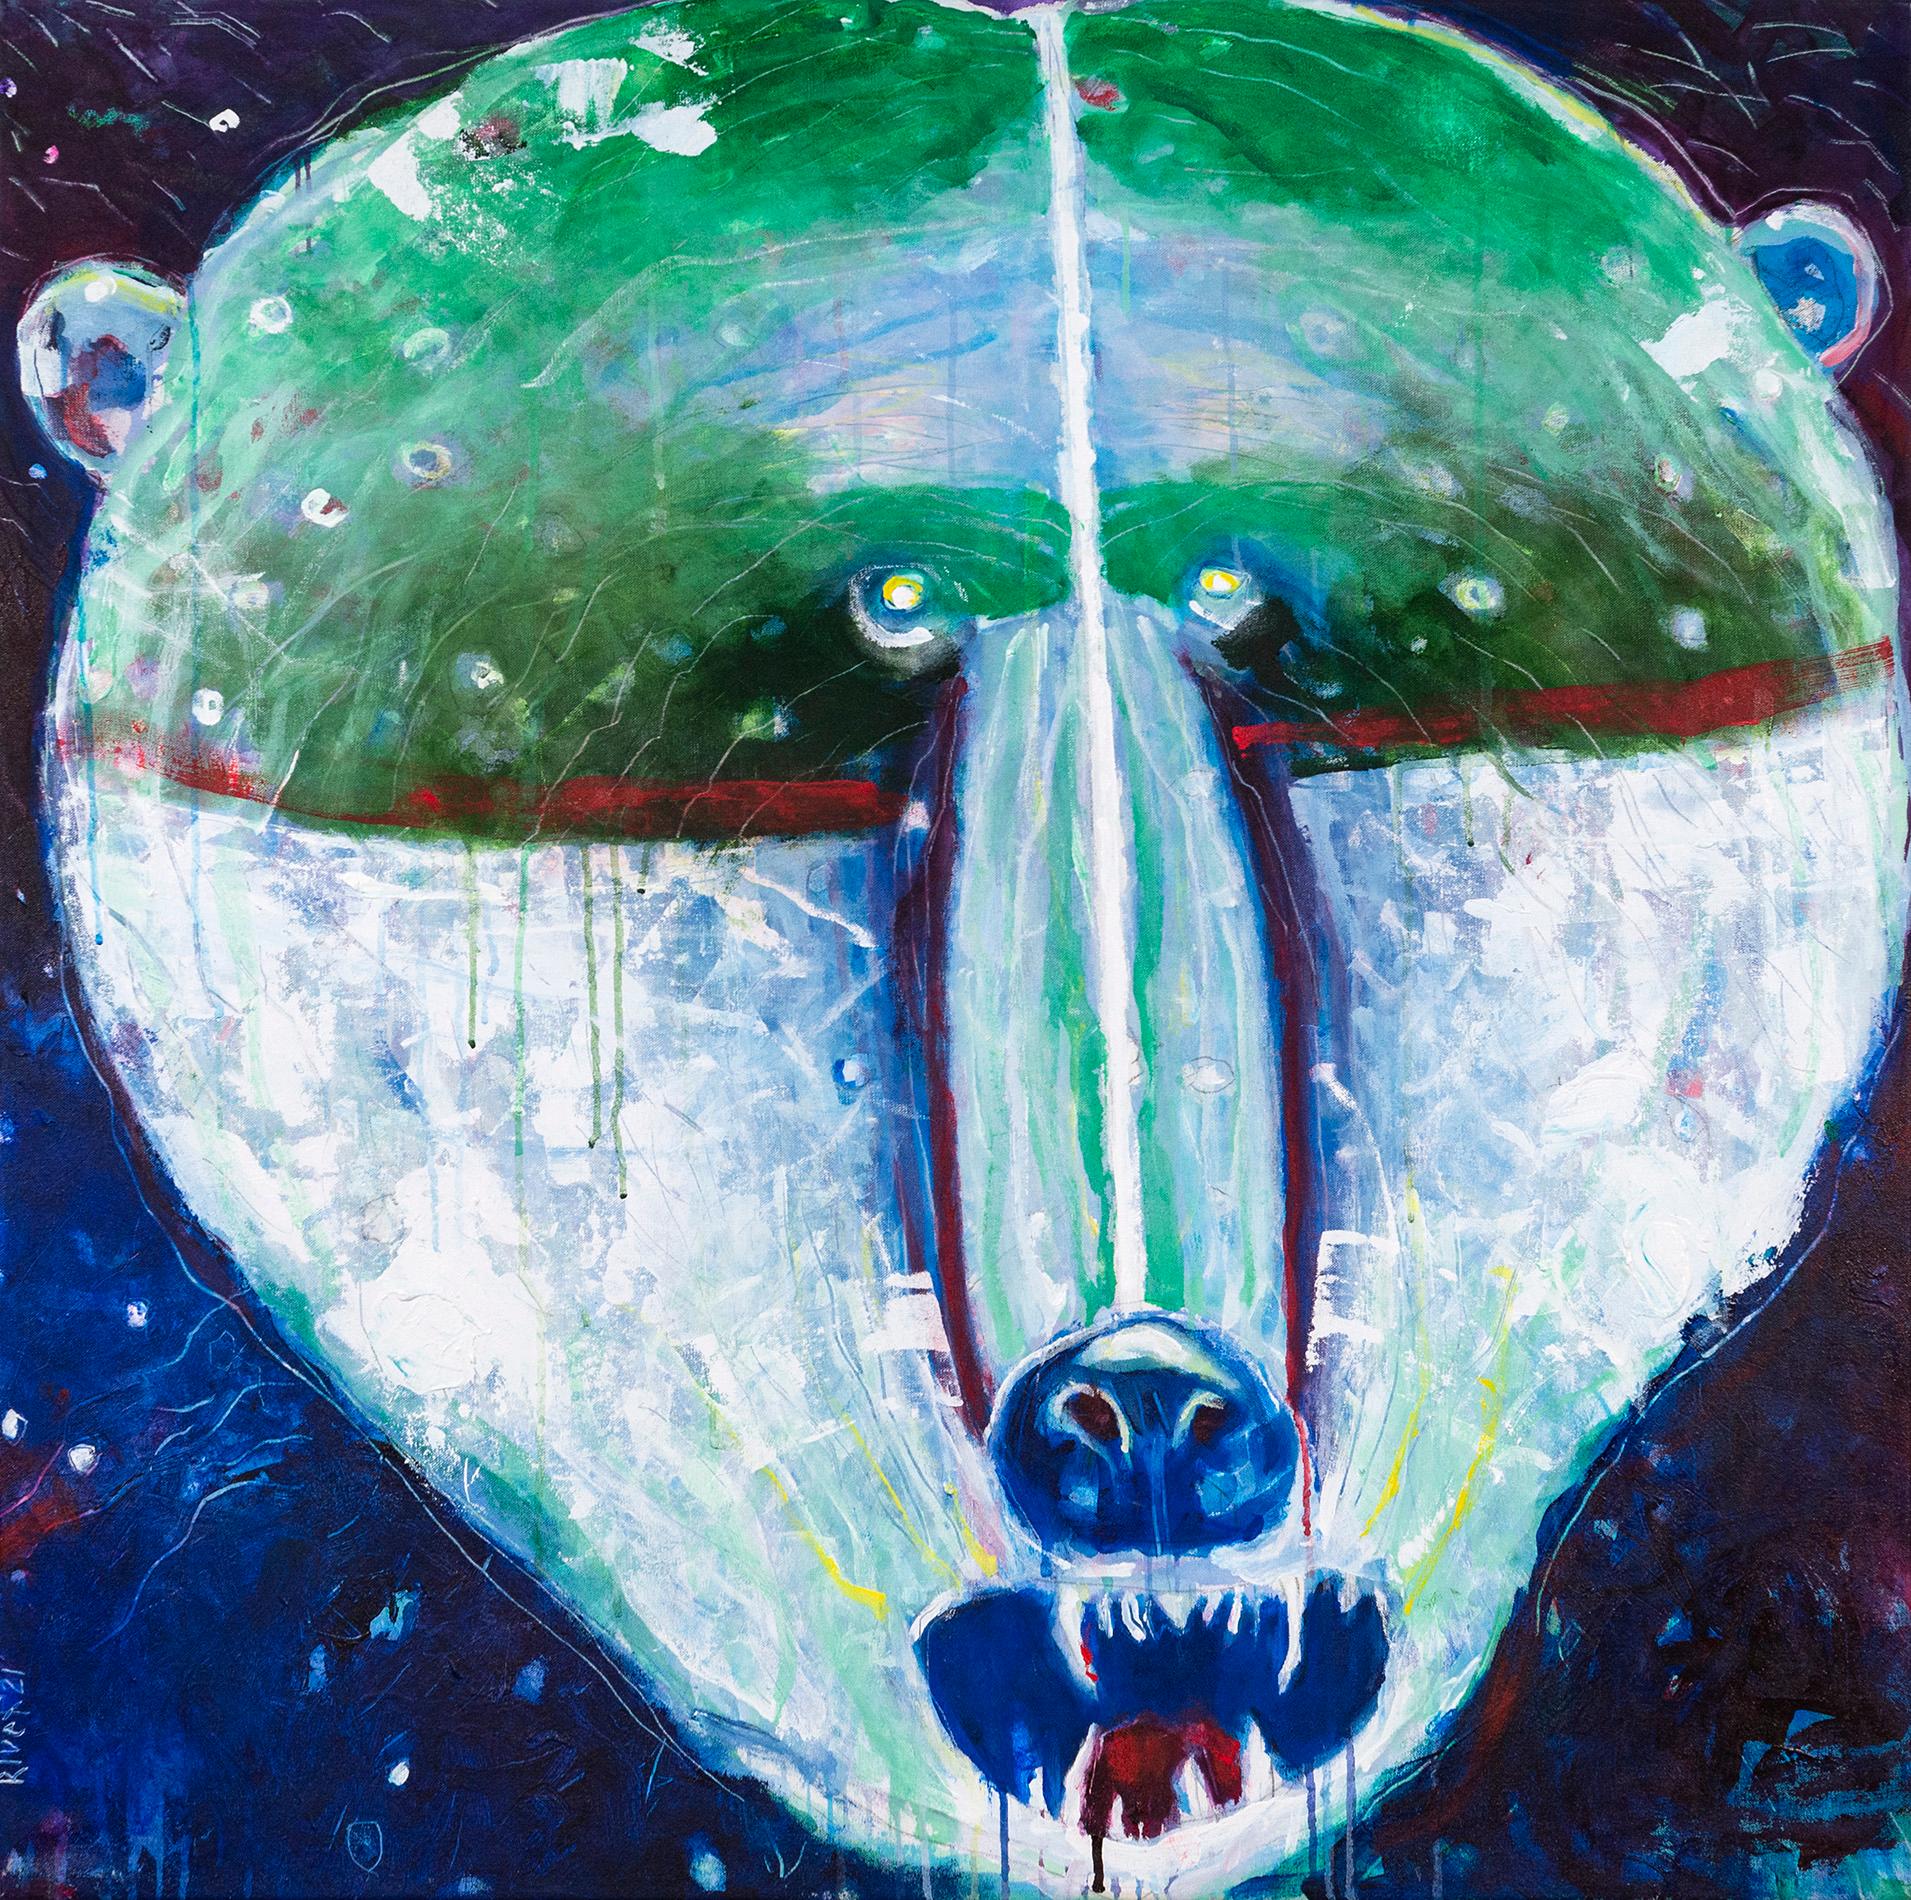 Rick Rivet Figurative Painting - Snow Face Grizzly - colourful, animal, indigenous, figurative, acrylic on canvas